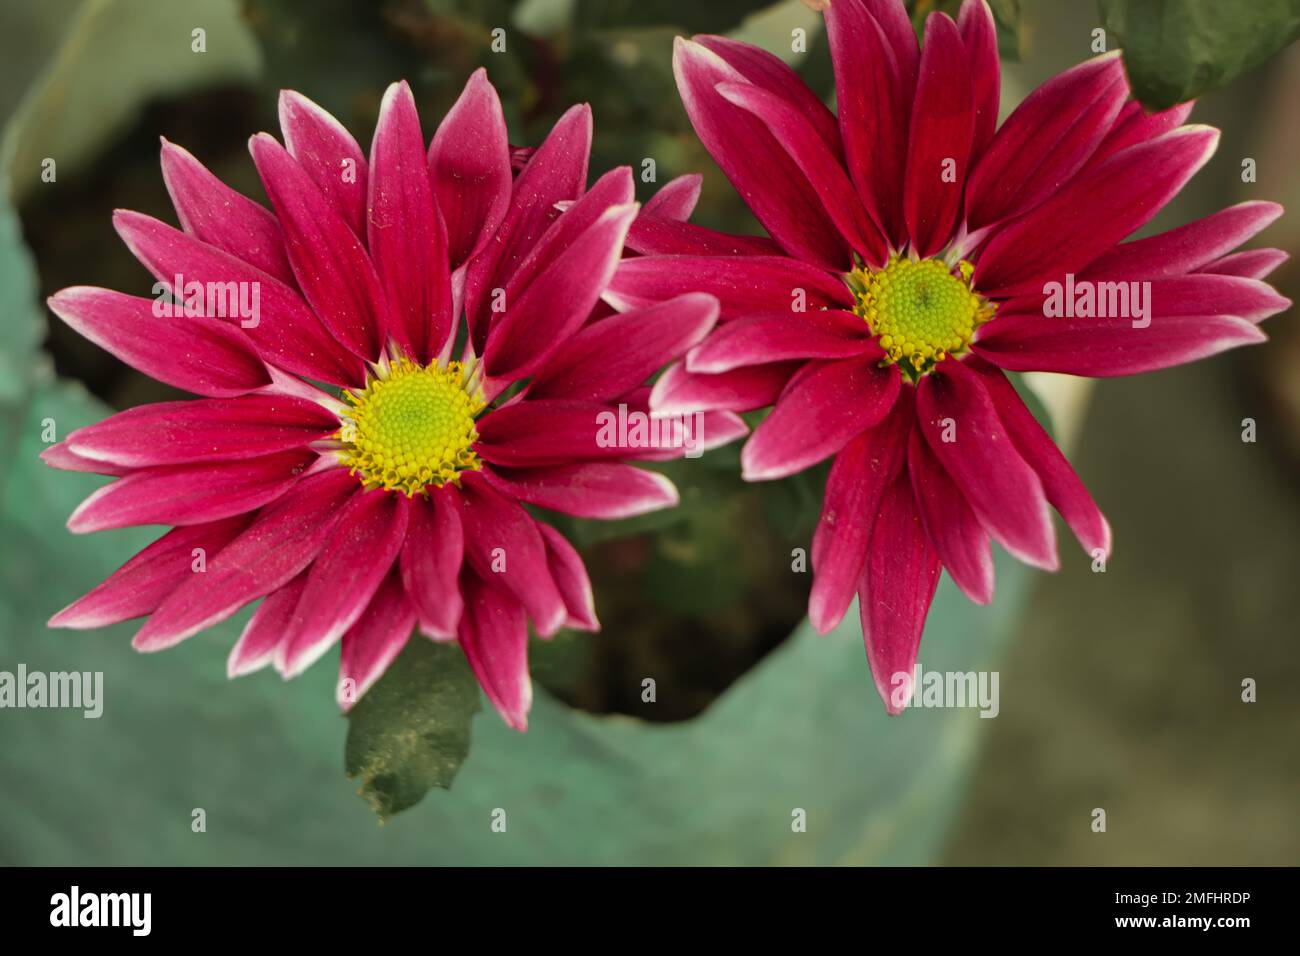 Pink purple white chrysanthemum. chrysanthemum flowers with yellow centers and white tips on their petals. Bush of Autumn Garden plants, growing flowe Stock Photo